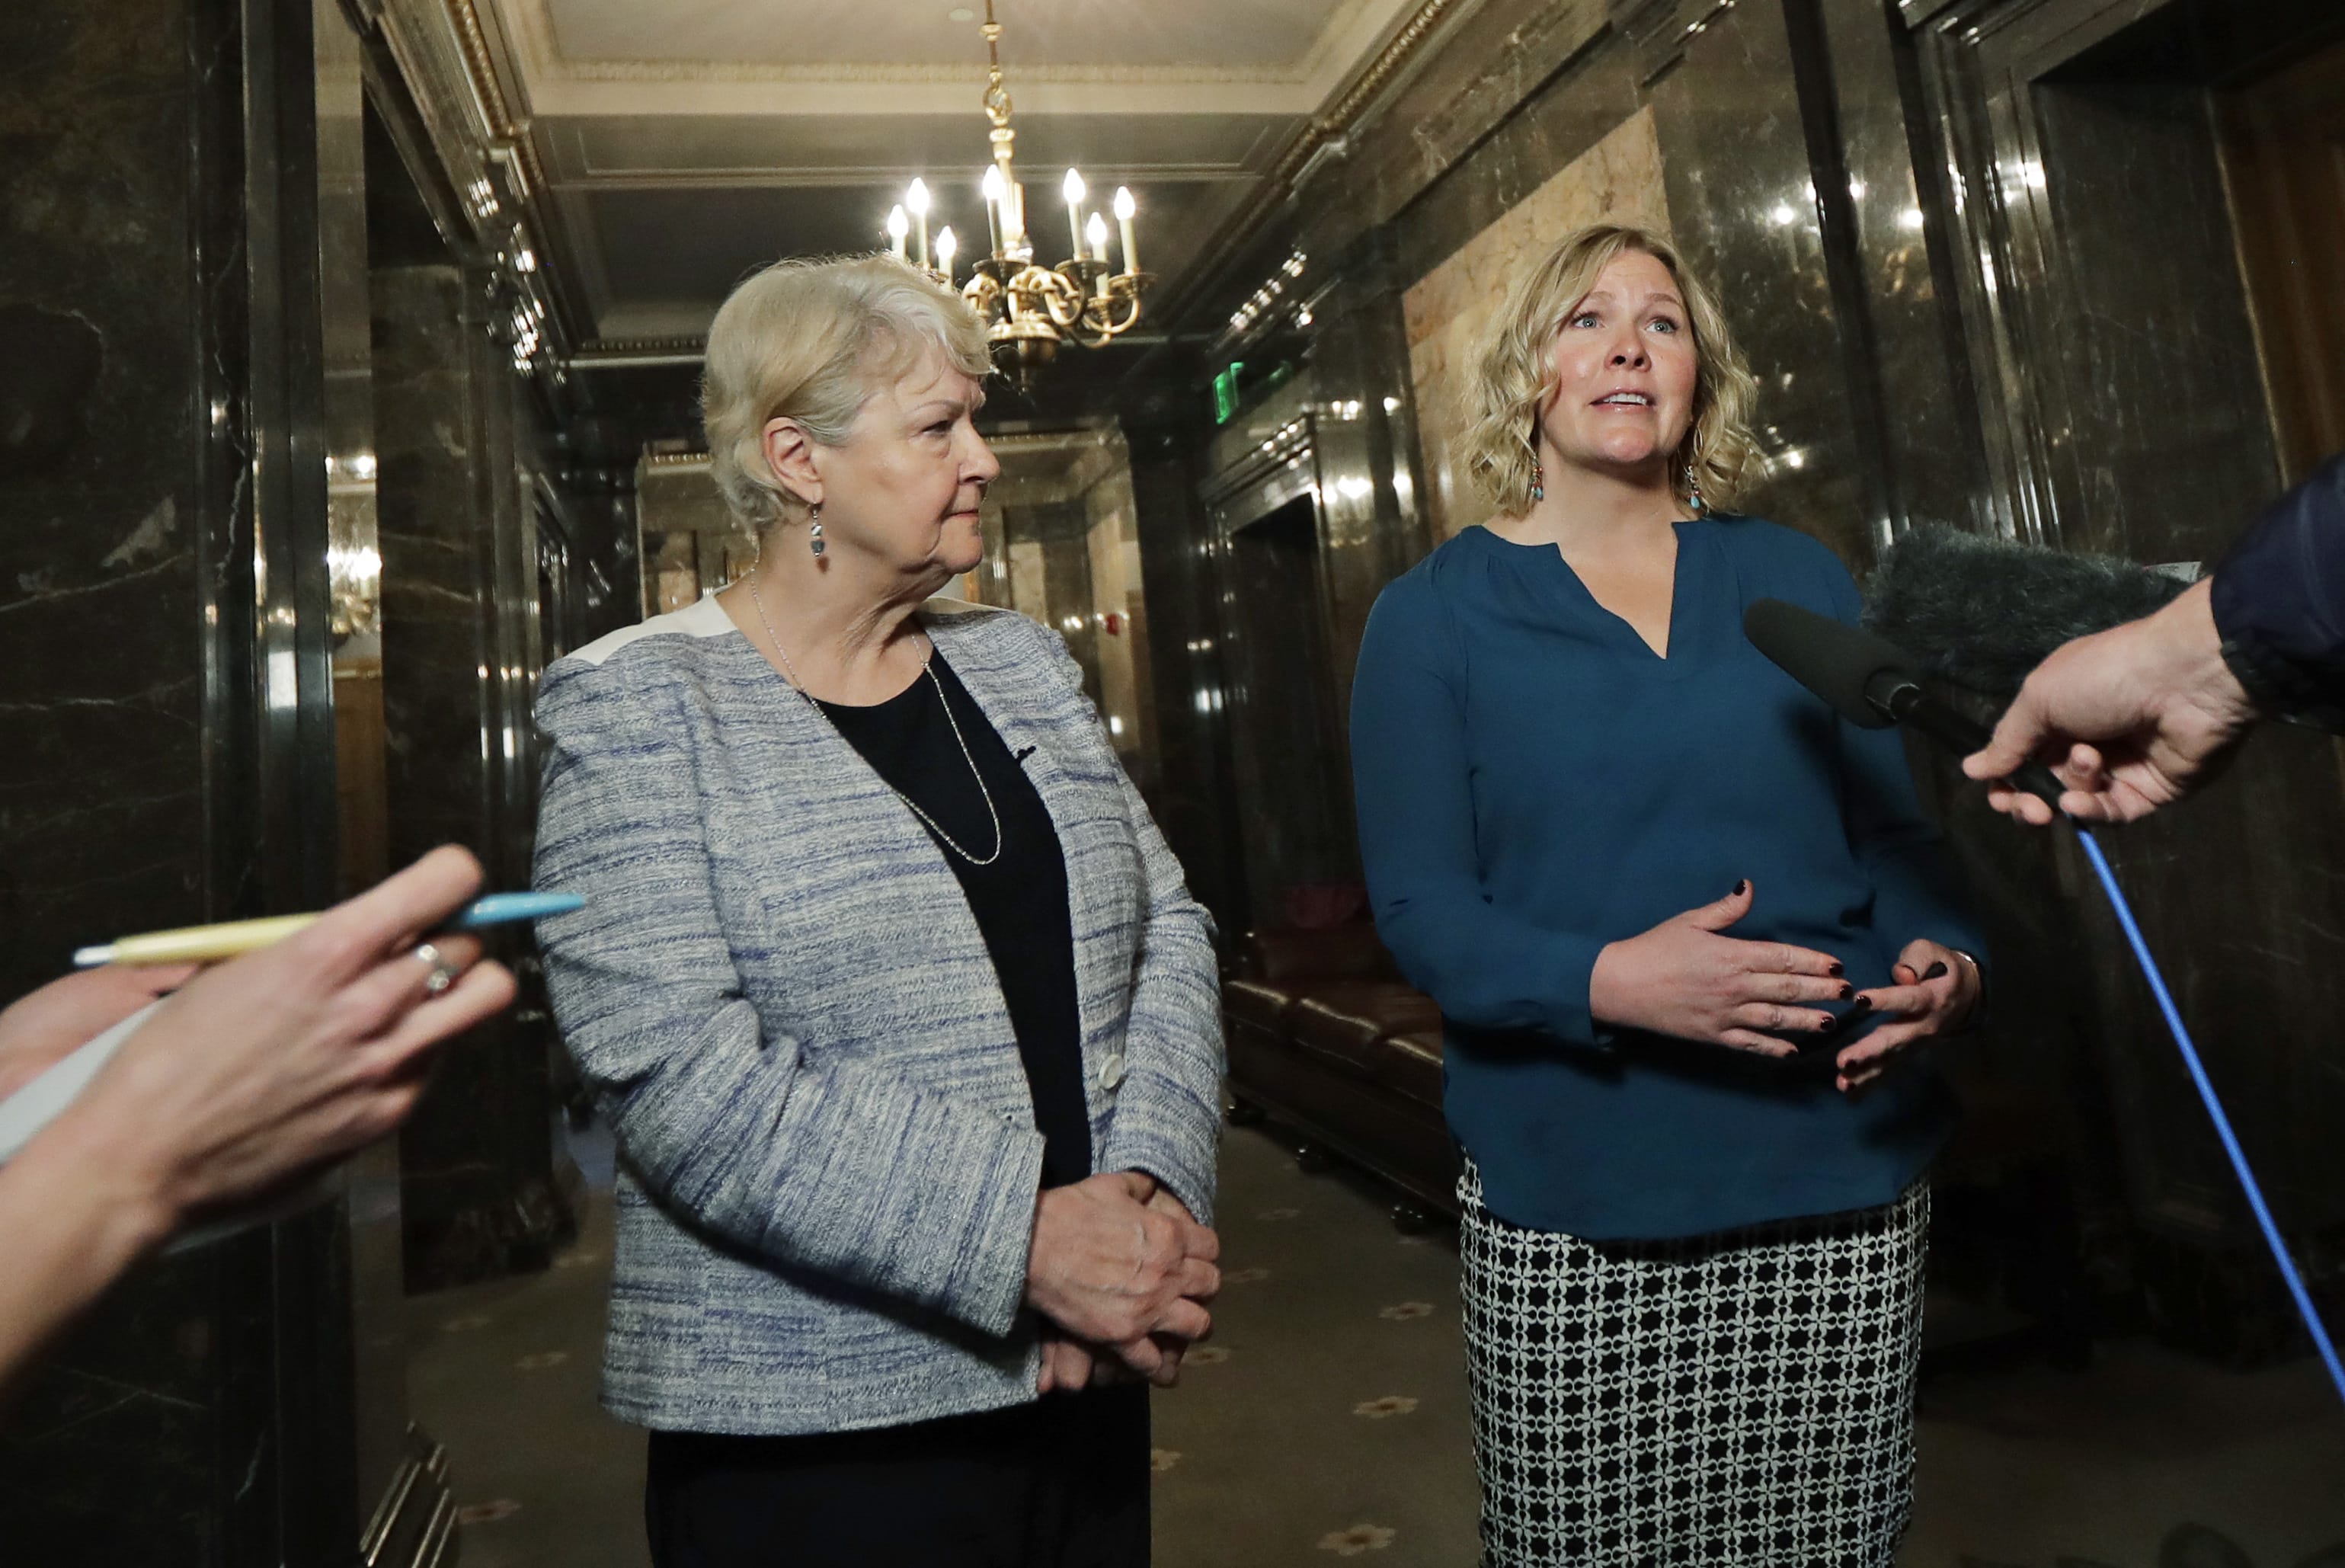 In this March 21, 2018, photo, Rebecca Johnson, right, a lobbyist who helped organize a letter signed by more than 200 women calling for a culture change at the Washington state Capitol, talks to reporters as Sen. Karen Keiser, D-Des Moines, left, looks on in Olympia, Wash. Washington's legislative session is over but the conversation about sexual harassment at the state Capitol continues, with the House and Senate each convening their own groups to discuss potentials codes of conduct and how to address complaints. (AP Photo/Ted S.